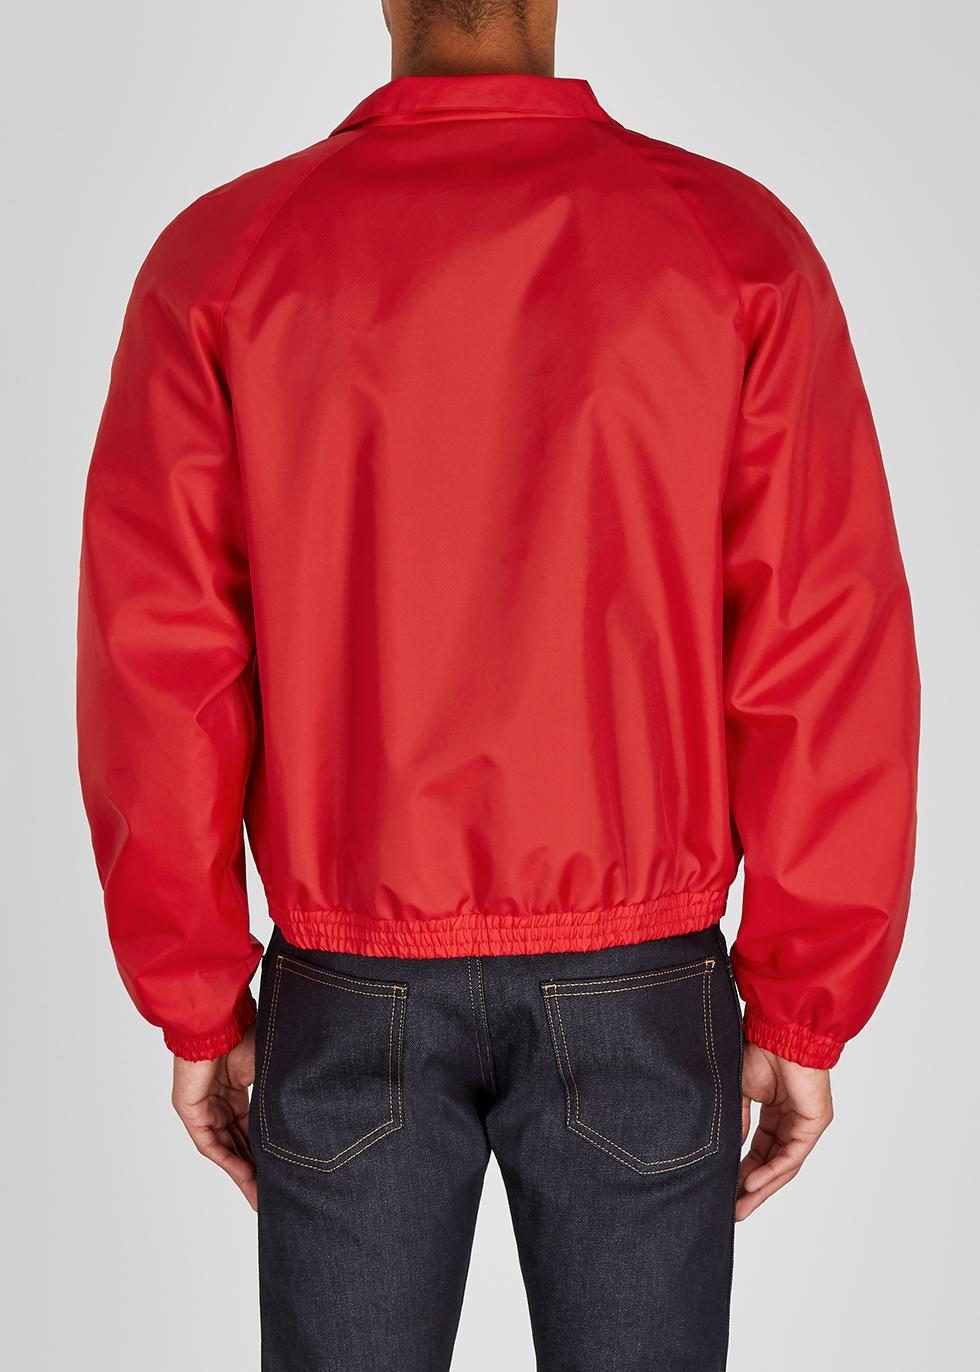 Gucci Shell Bomber Jacket Blue for Men | Lyst